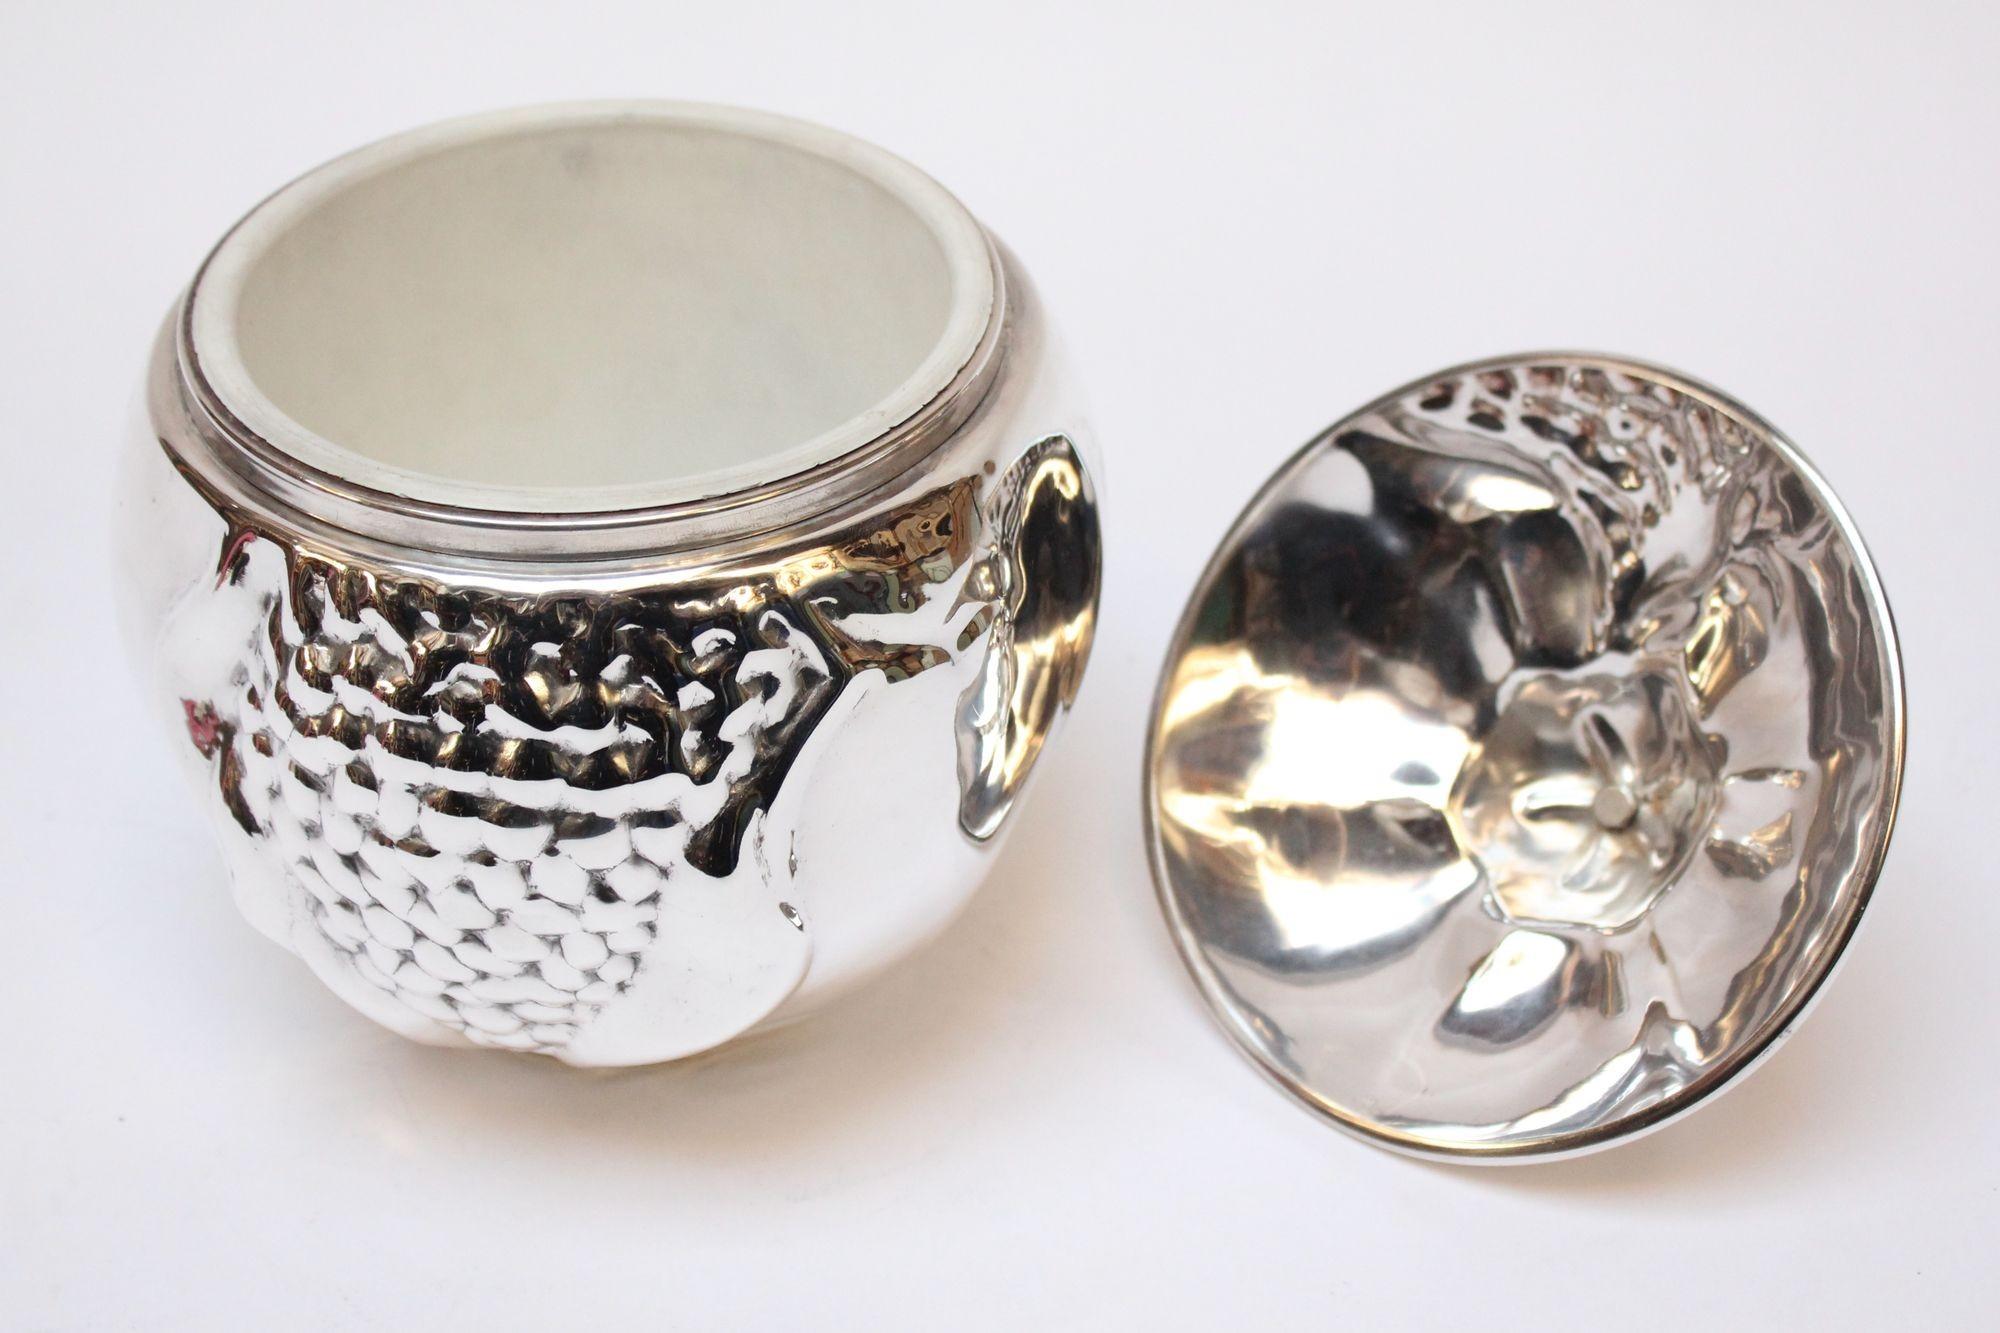 Mid-20th Century Italian Modernist Silver-Plated Insulated 